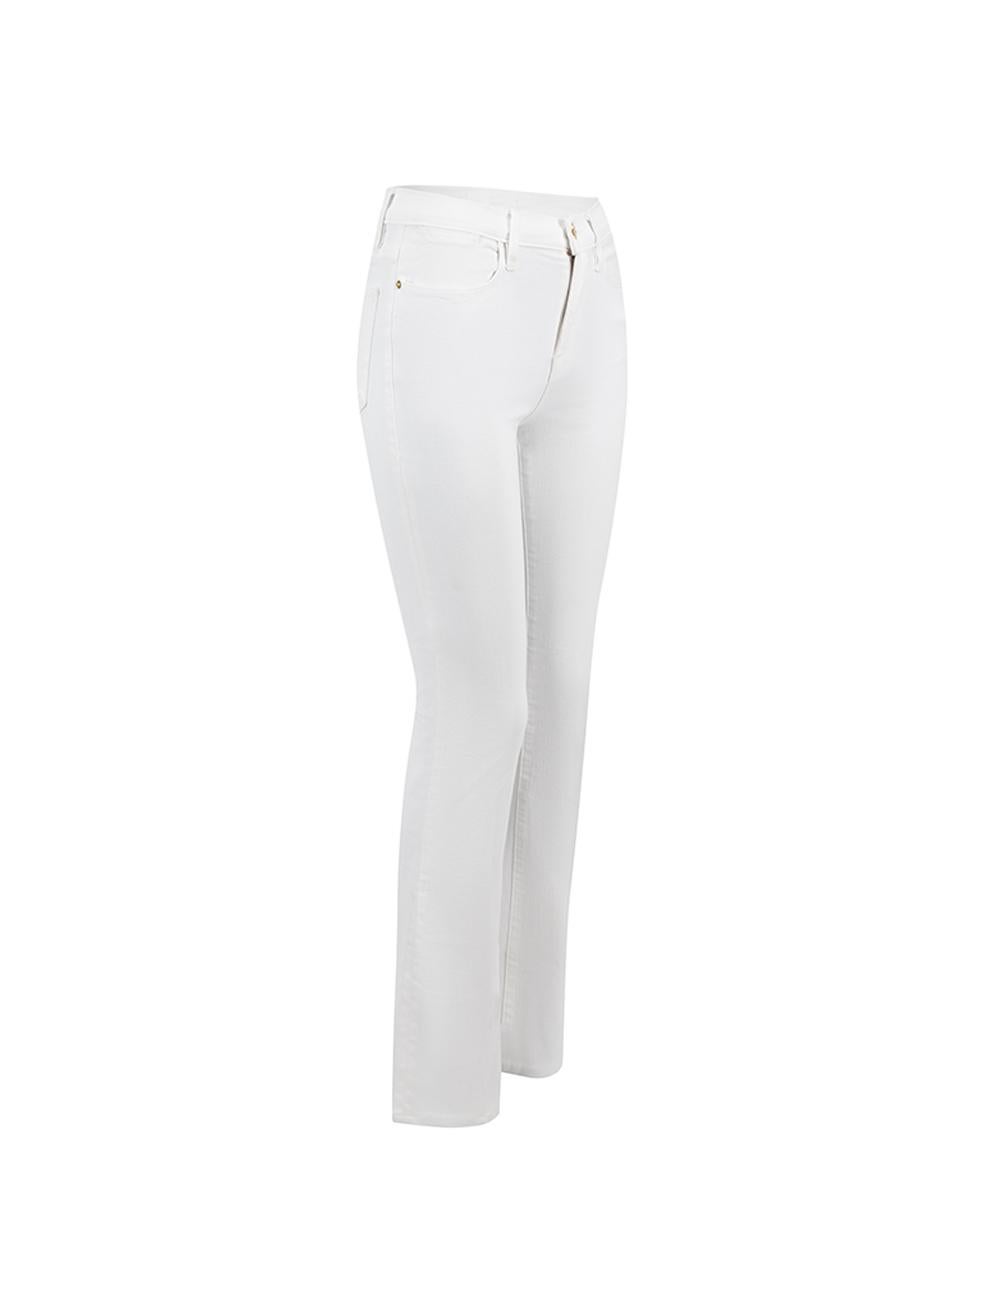 CONDITION is Very good. Minimal wear to jeans is evident. Minimal wear to the exterior denim material where some light marks can be seen on this used FRAME designer resale item.   Details  White Denim Flared jeans High rise Front zip closure with